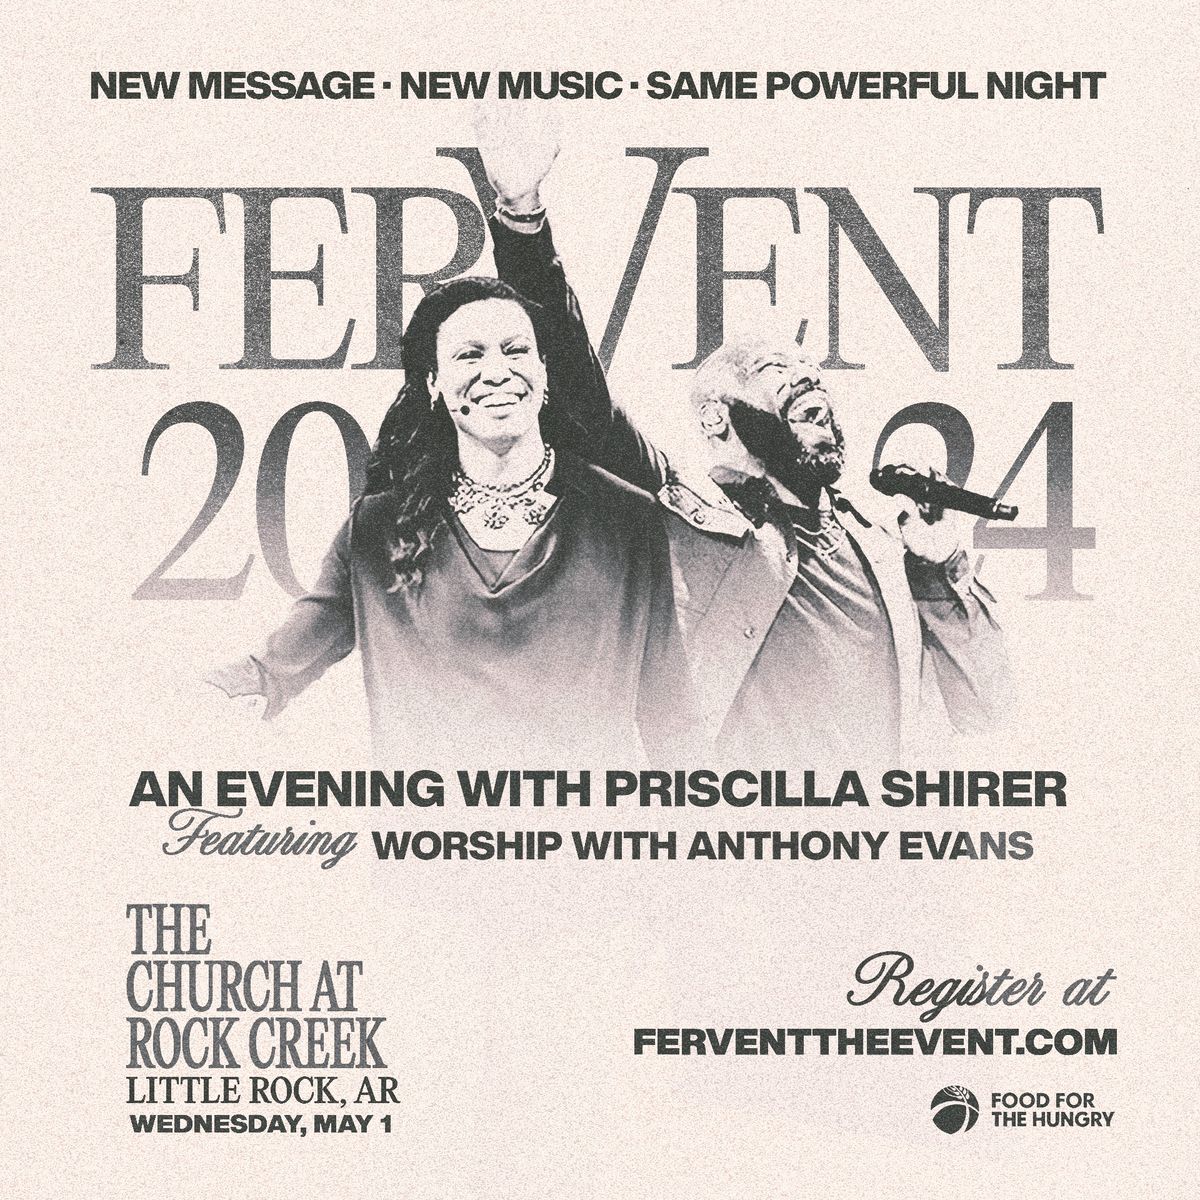 FerVent with Priscilla Shirer and Anthony Evans